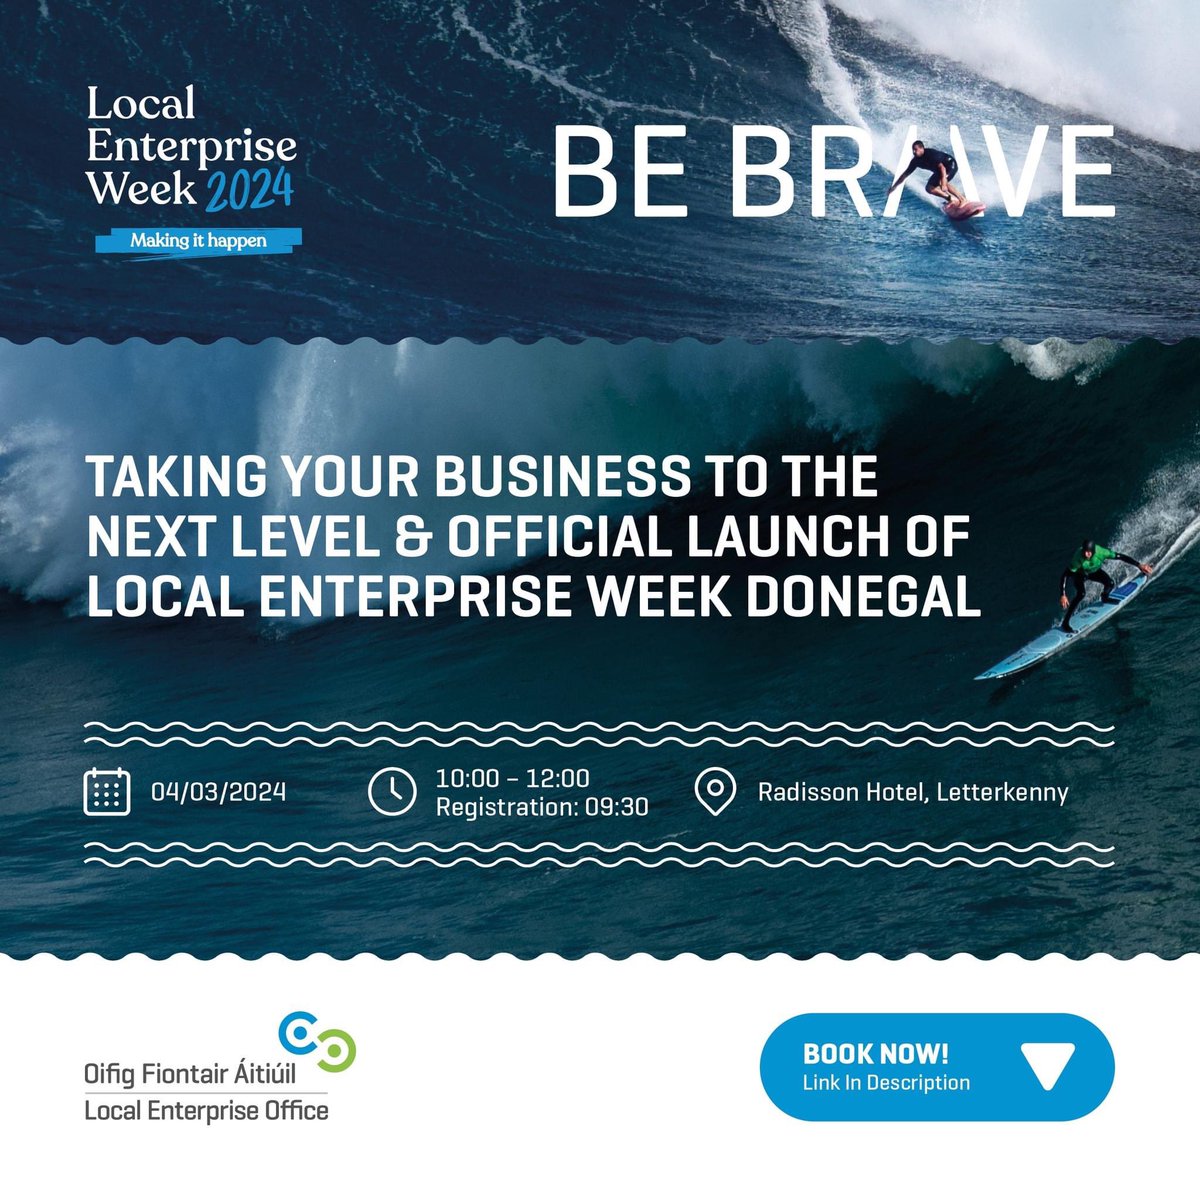 Today is the day and we’re all set for the official launch of Local Enterprise Week!

Check out the full programme of events for the week here: 

localenterprise.ie/Donegal/Enterp…

#LEODonegal #BeBrave #LocalEnterpriseWeek